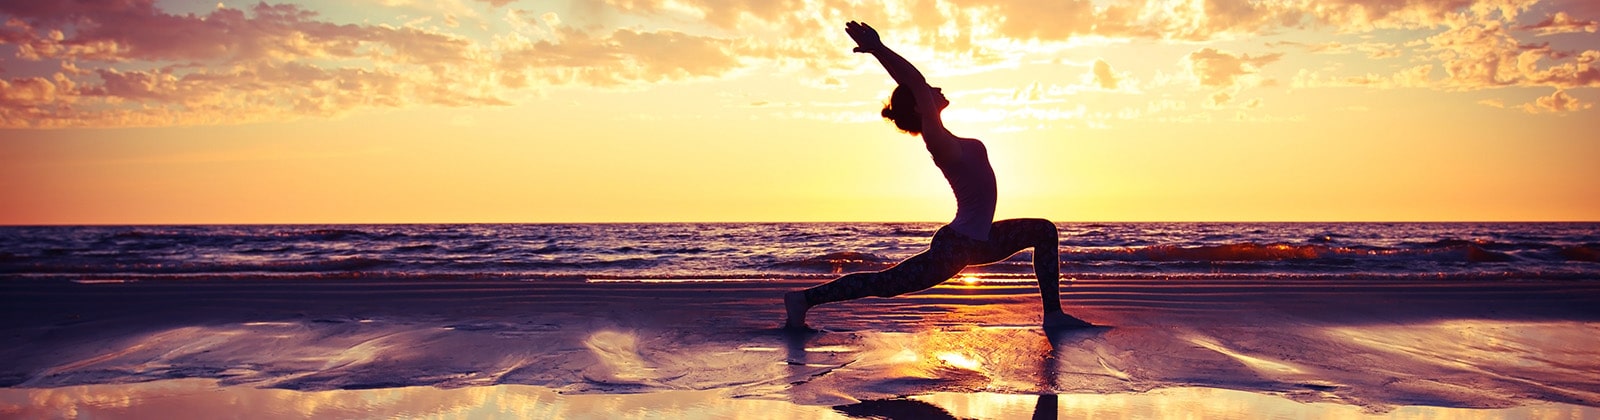 Woman doing yoga on the beach at sunset